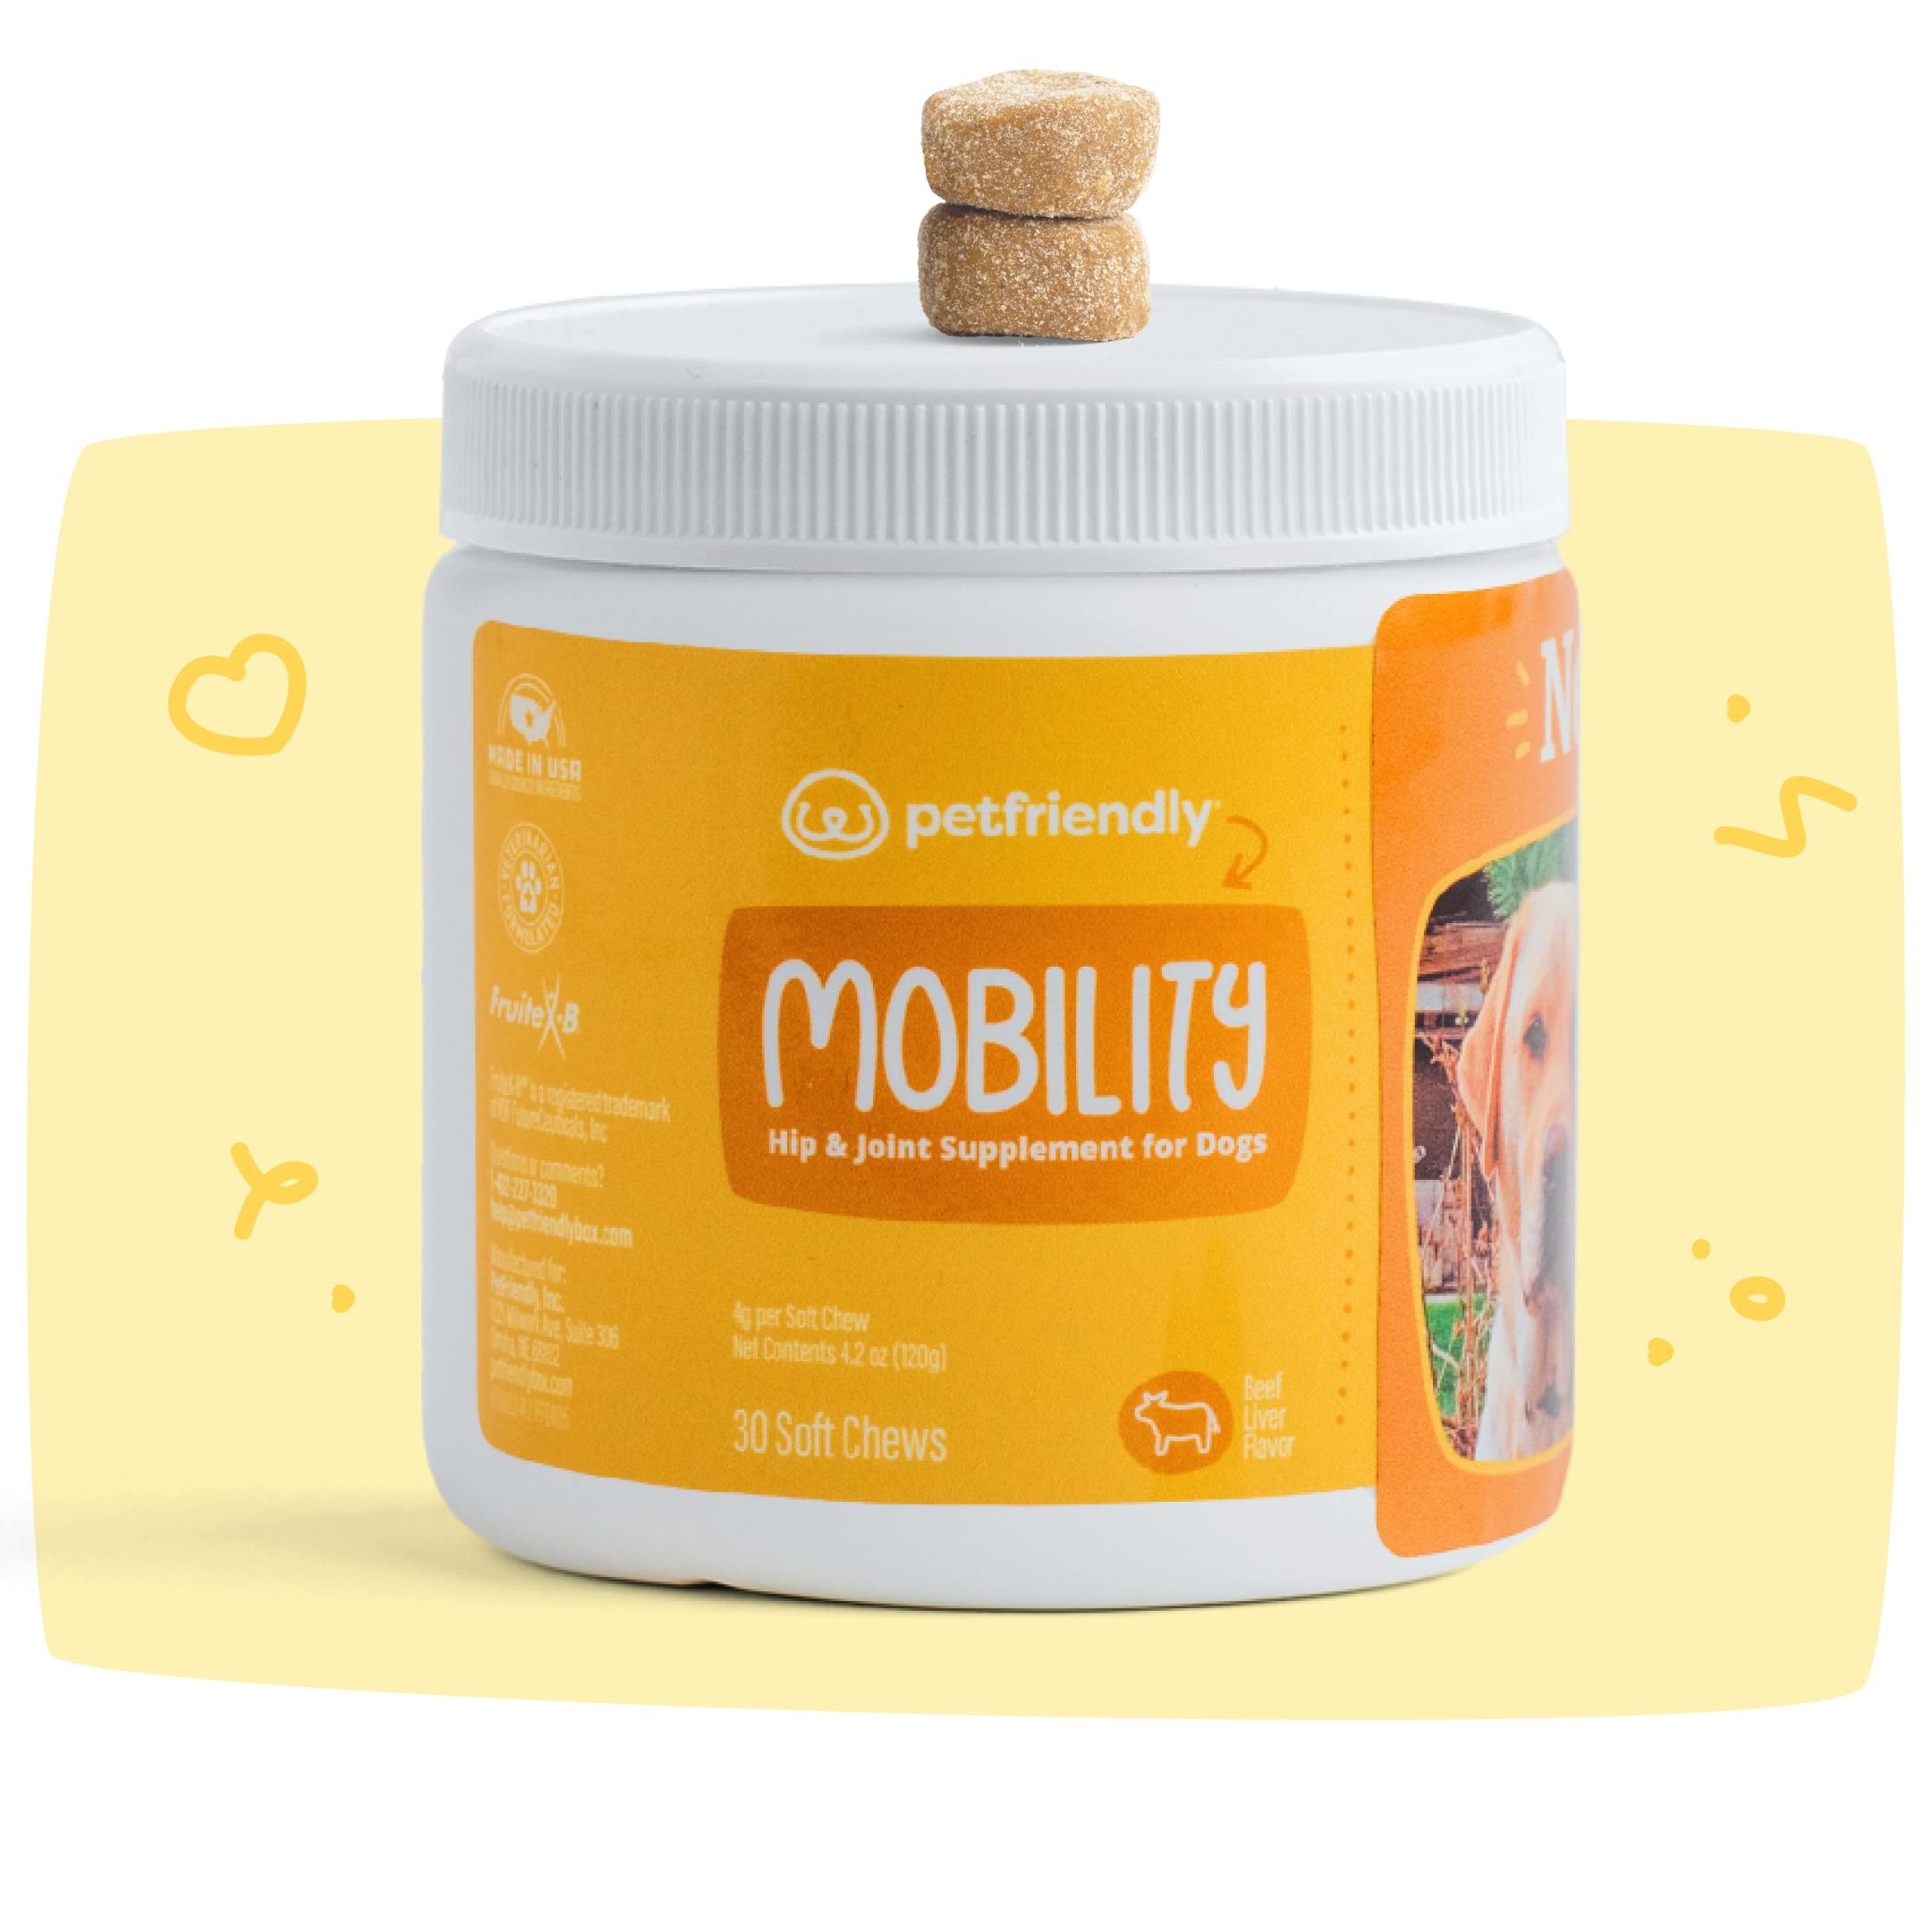 Mobility Hip & Joint Supplement for Dogs